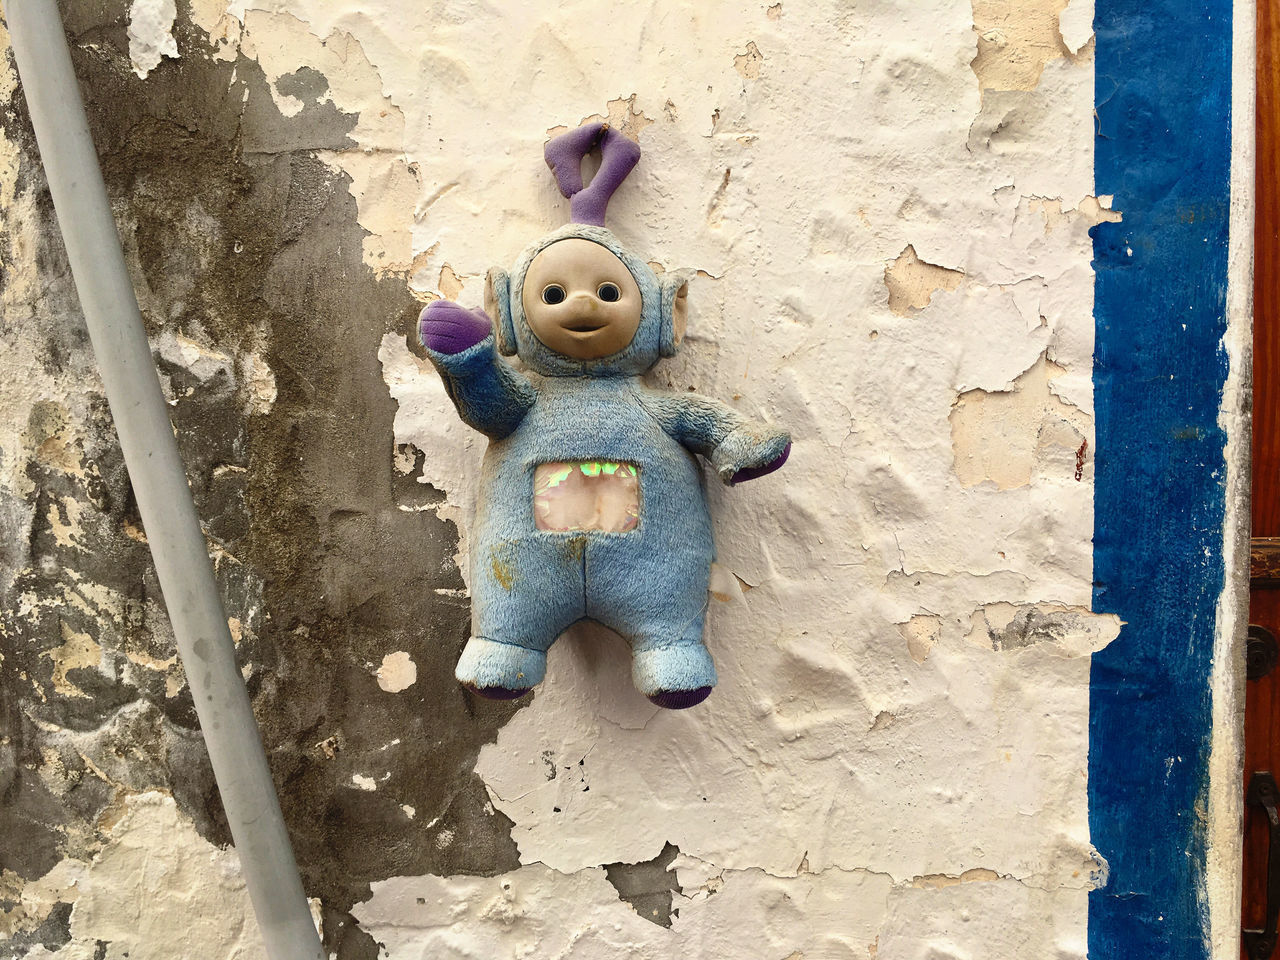 CLOSE-UP OF STUFFED TOY AGAINST WALL